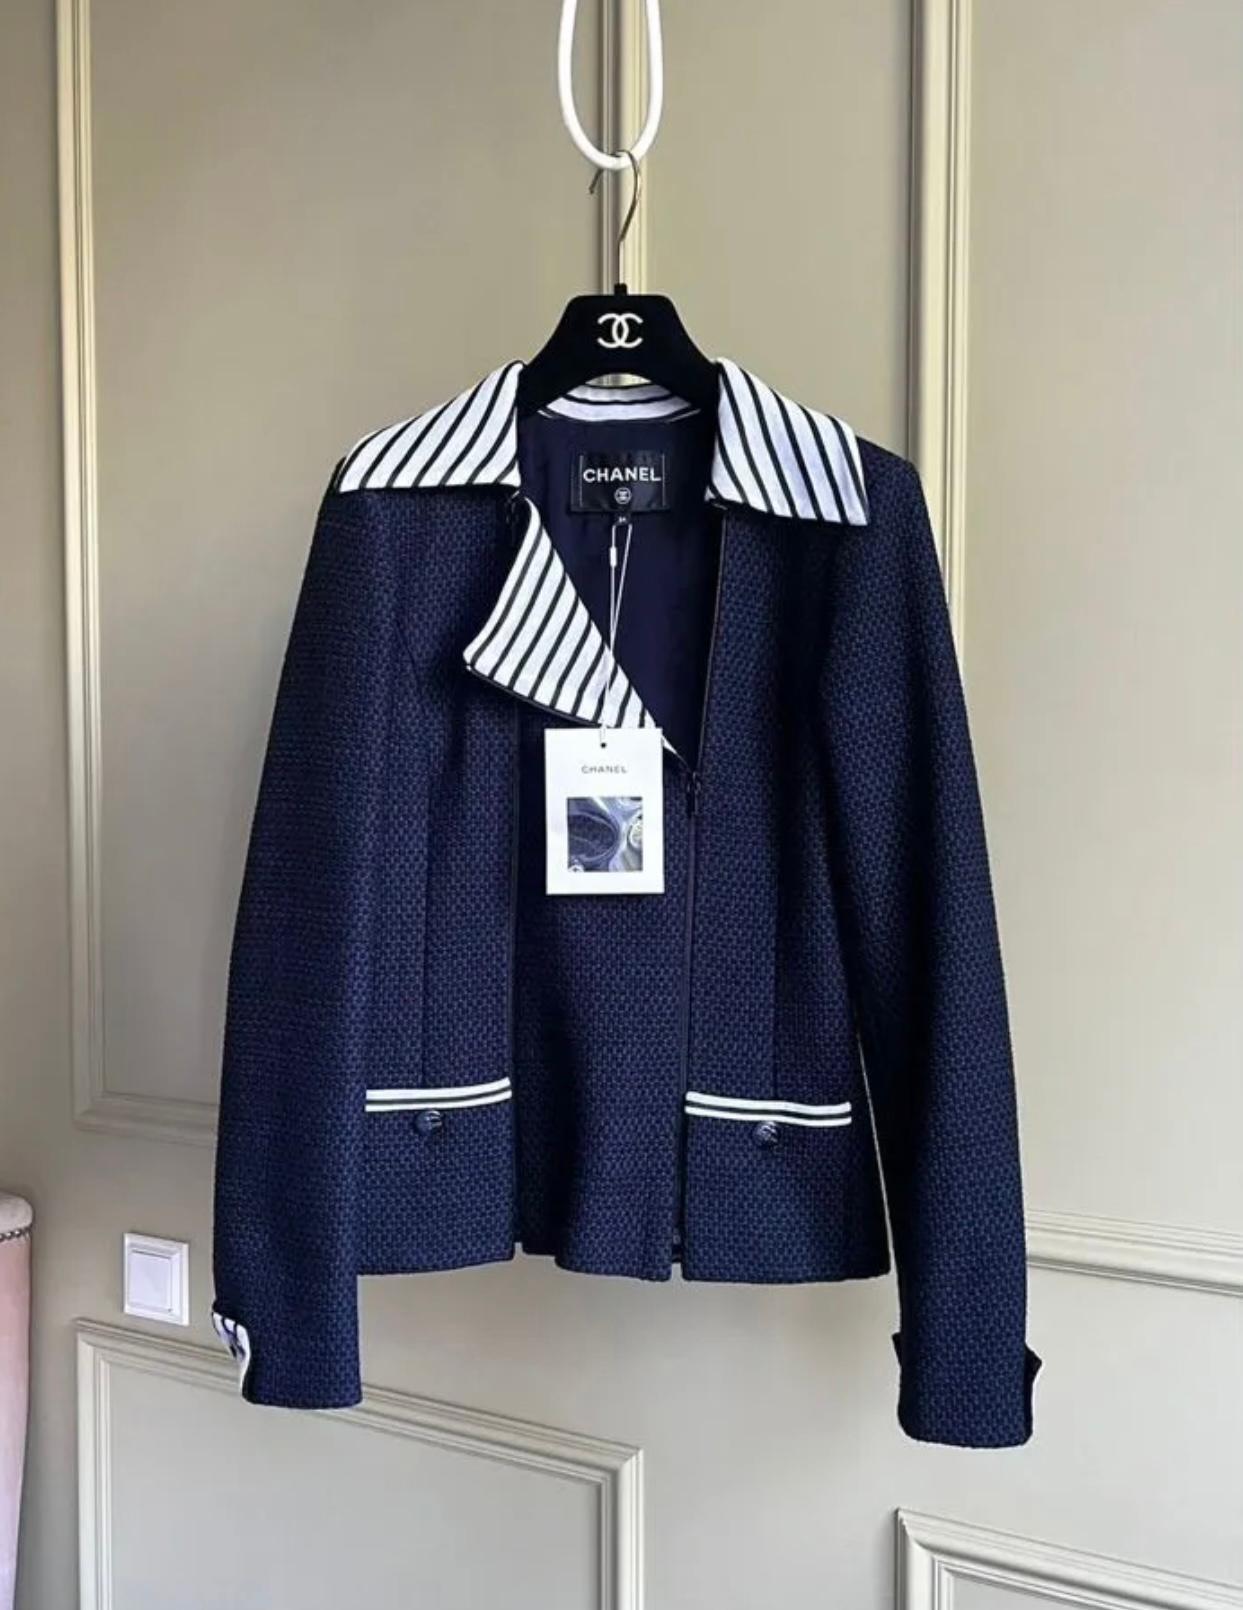 New Chanel maritime navy tweed jacket with CC logo buttons.
Size mark 34 FR. Comes with tag.